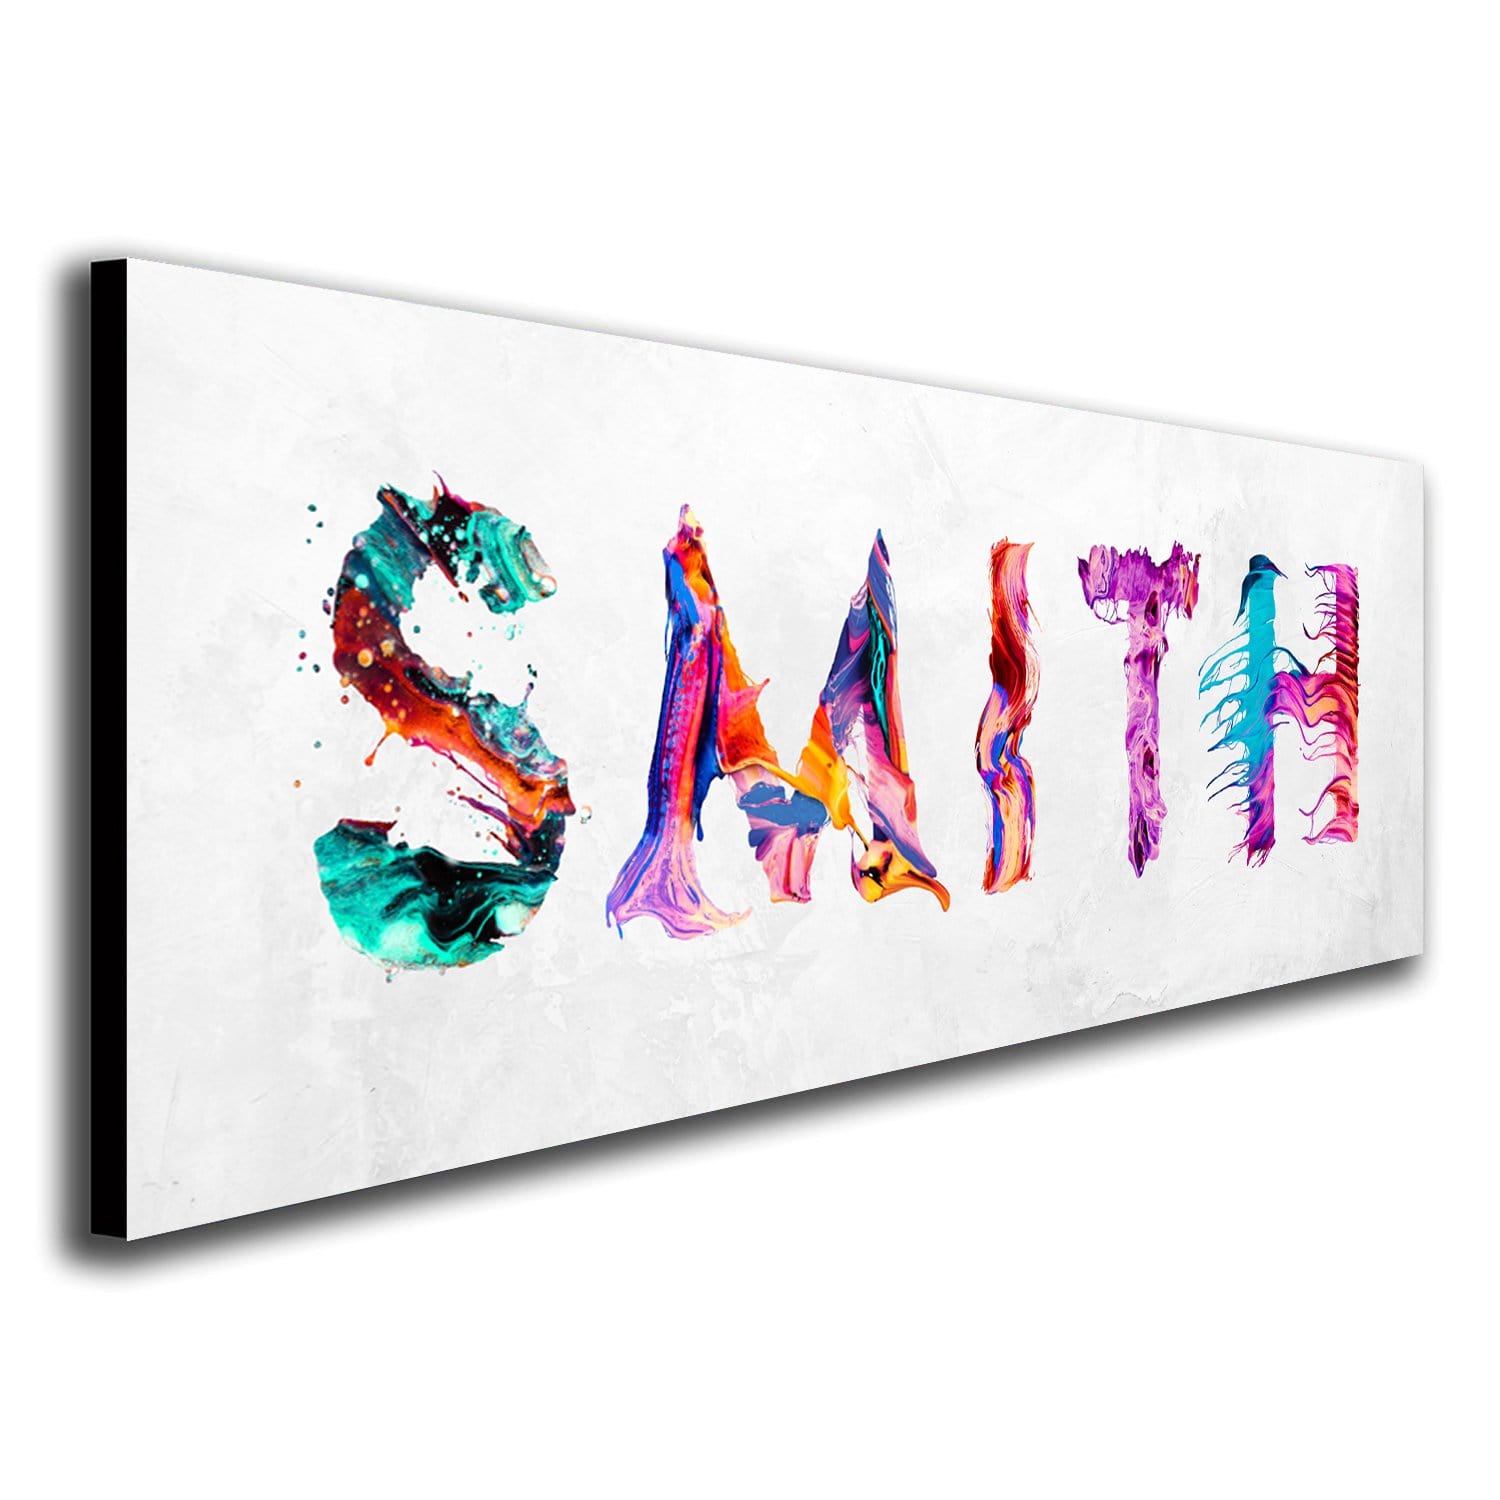 Personalized Colorful Paint Name Art Print Using Letters Made From Splattered Paint- Angled View